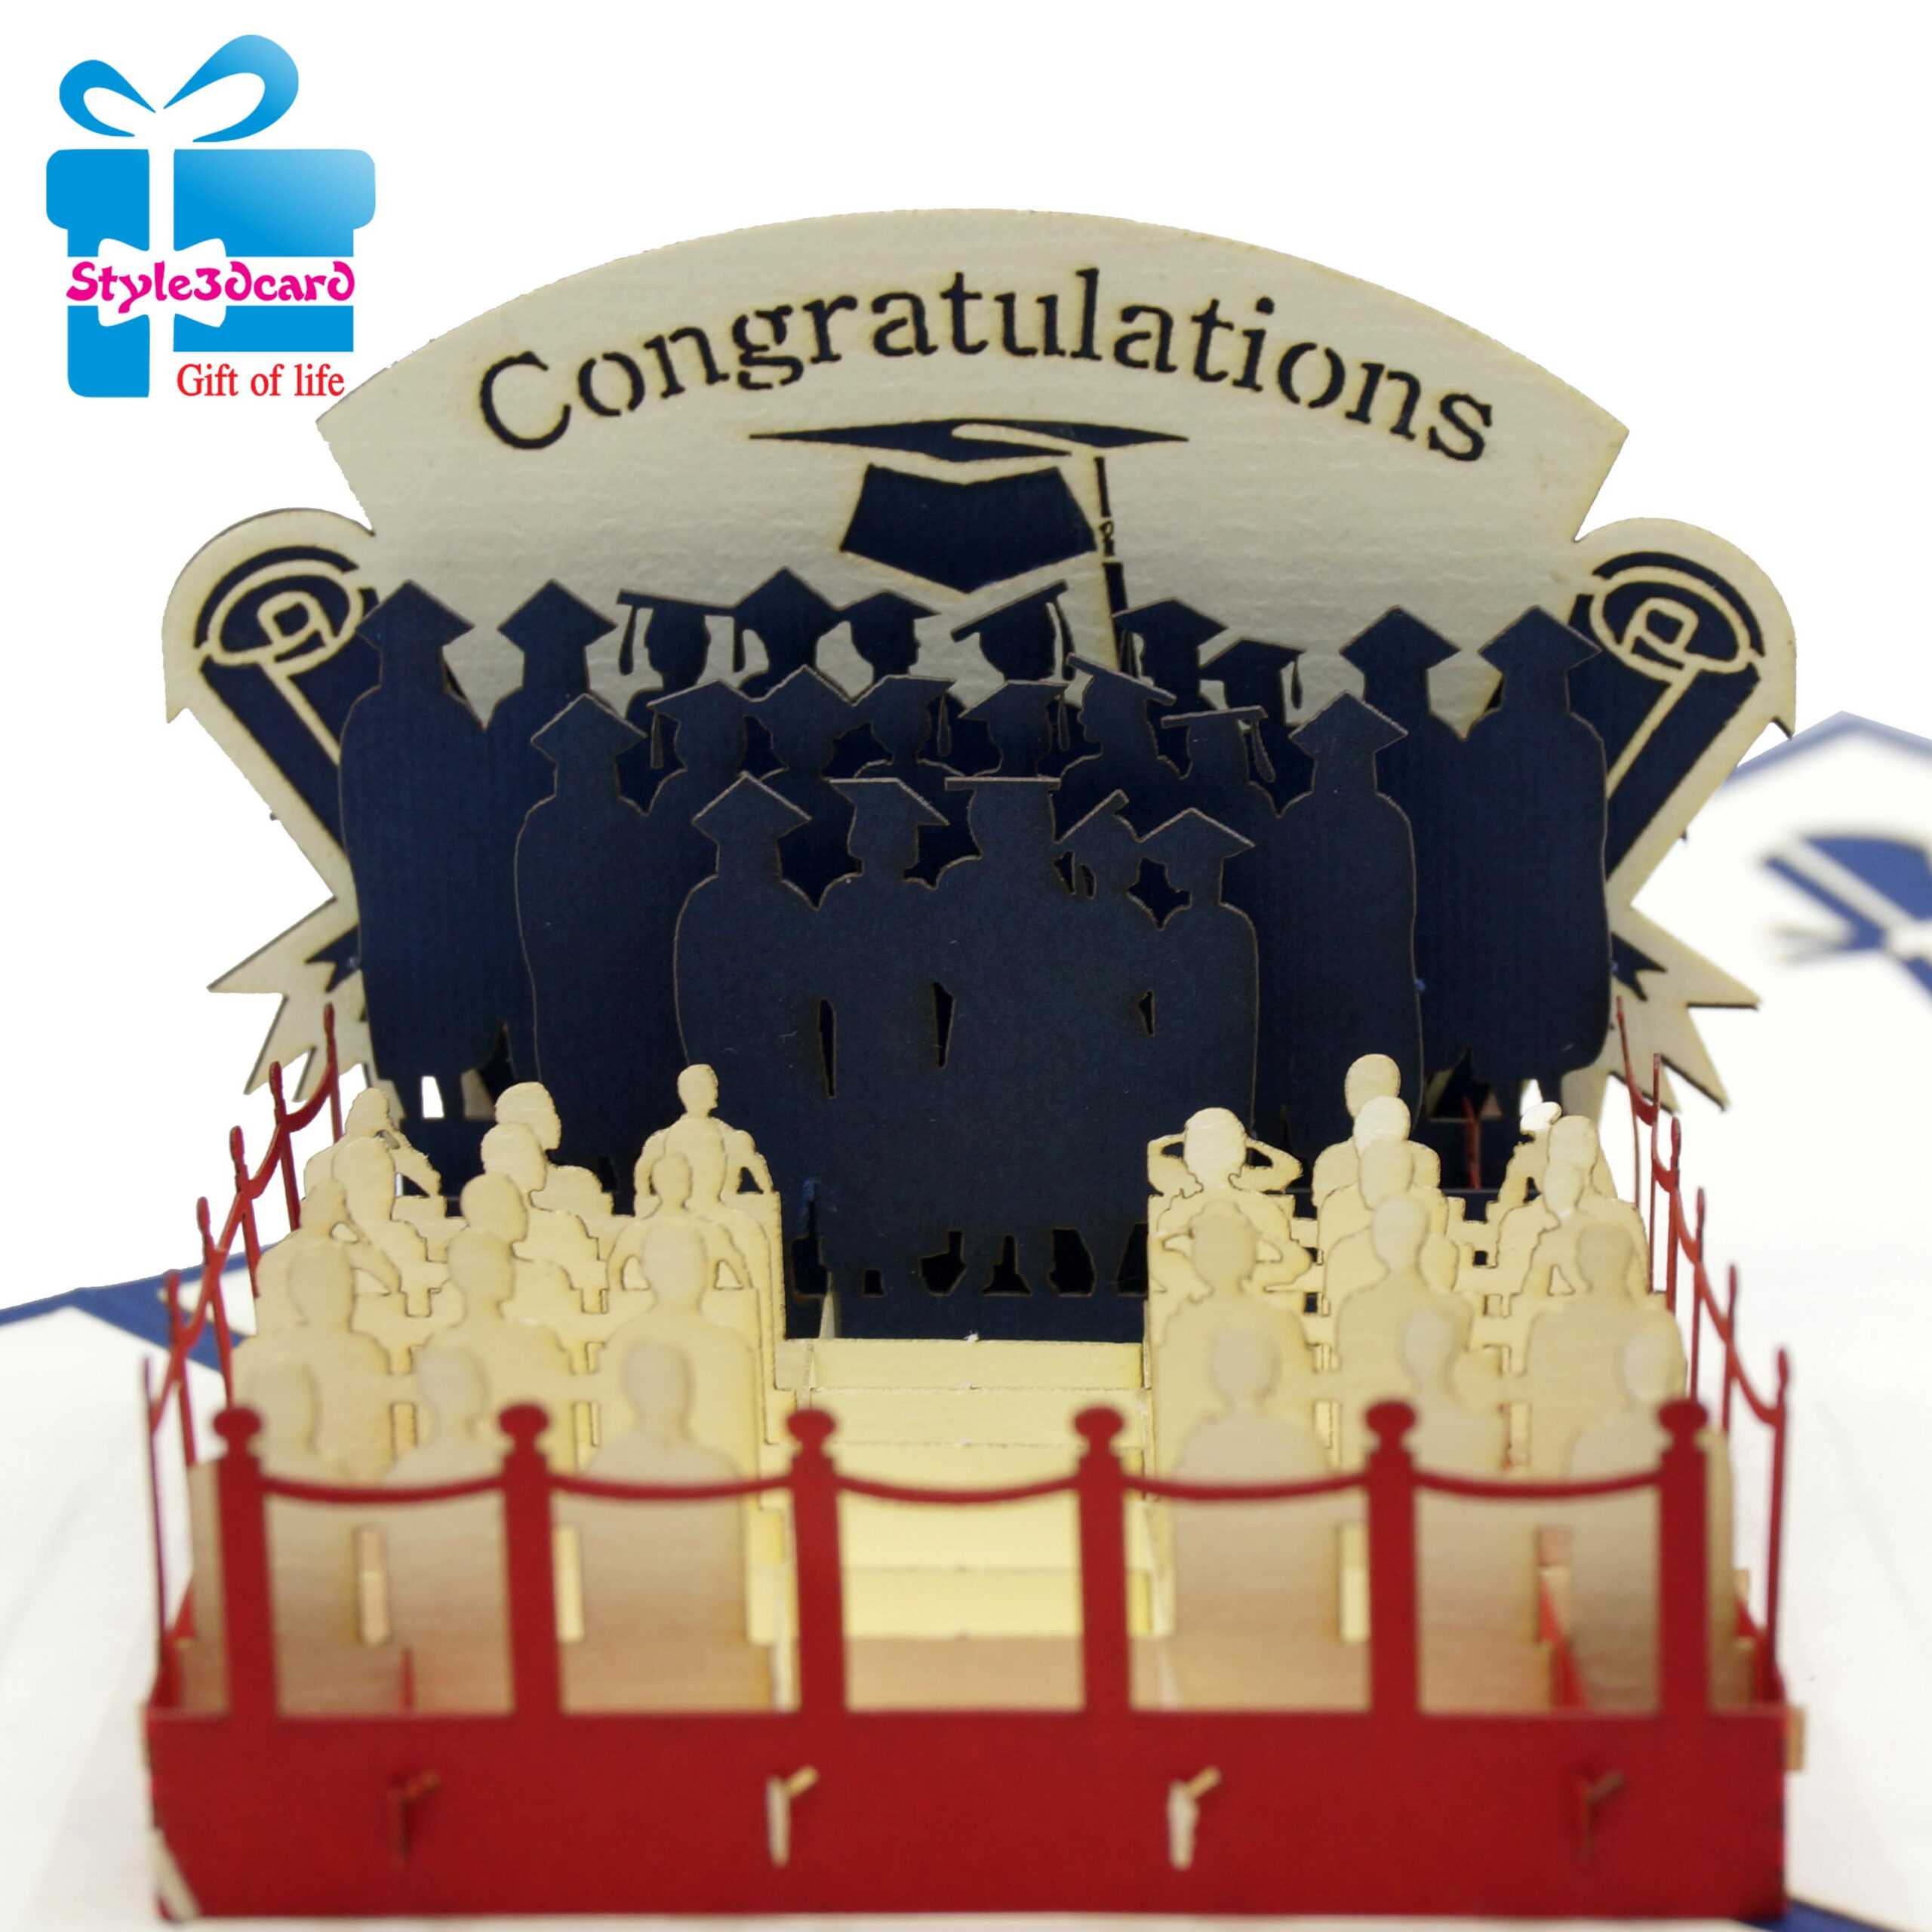 Greeting 3D Pop Up Card With Graduation Pop Up Card Template